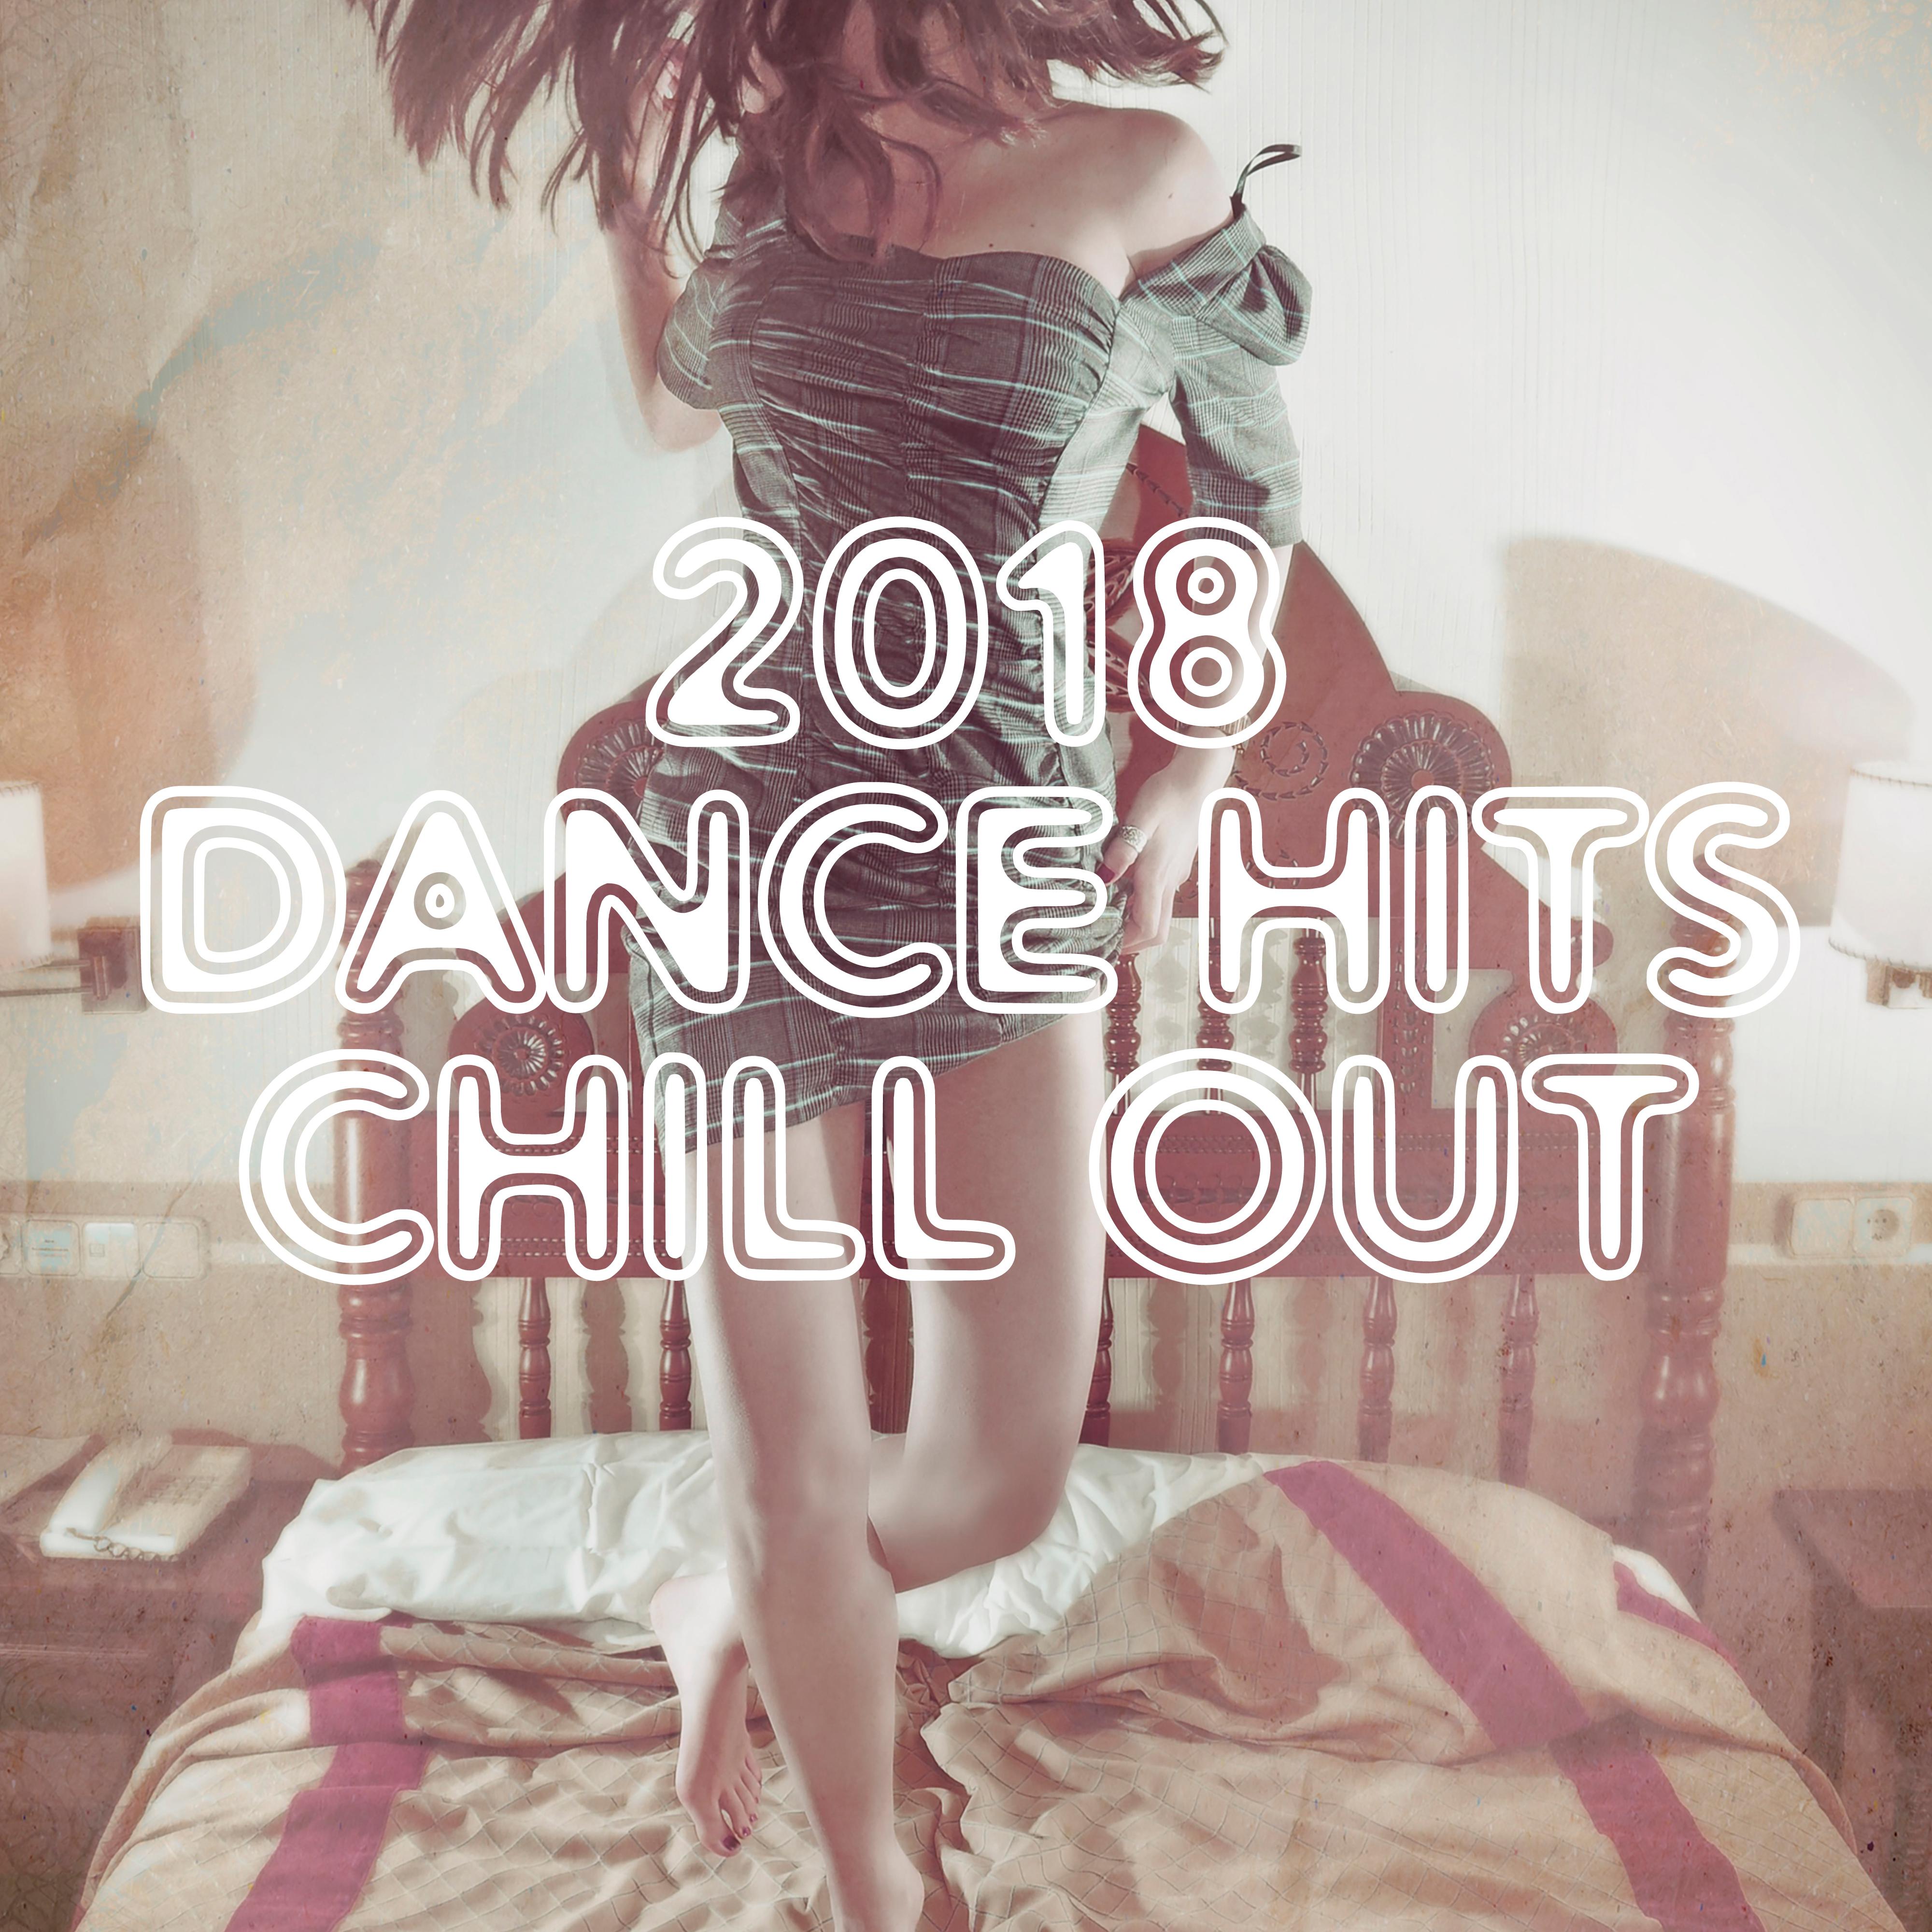 2018 Dance Hits Chill Out